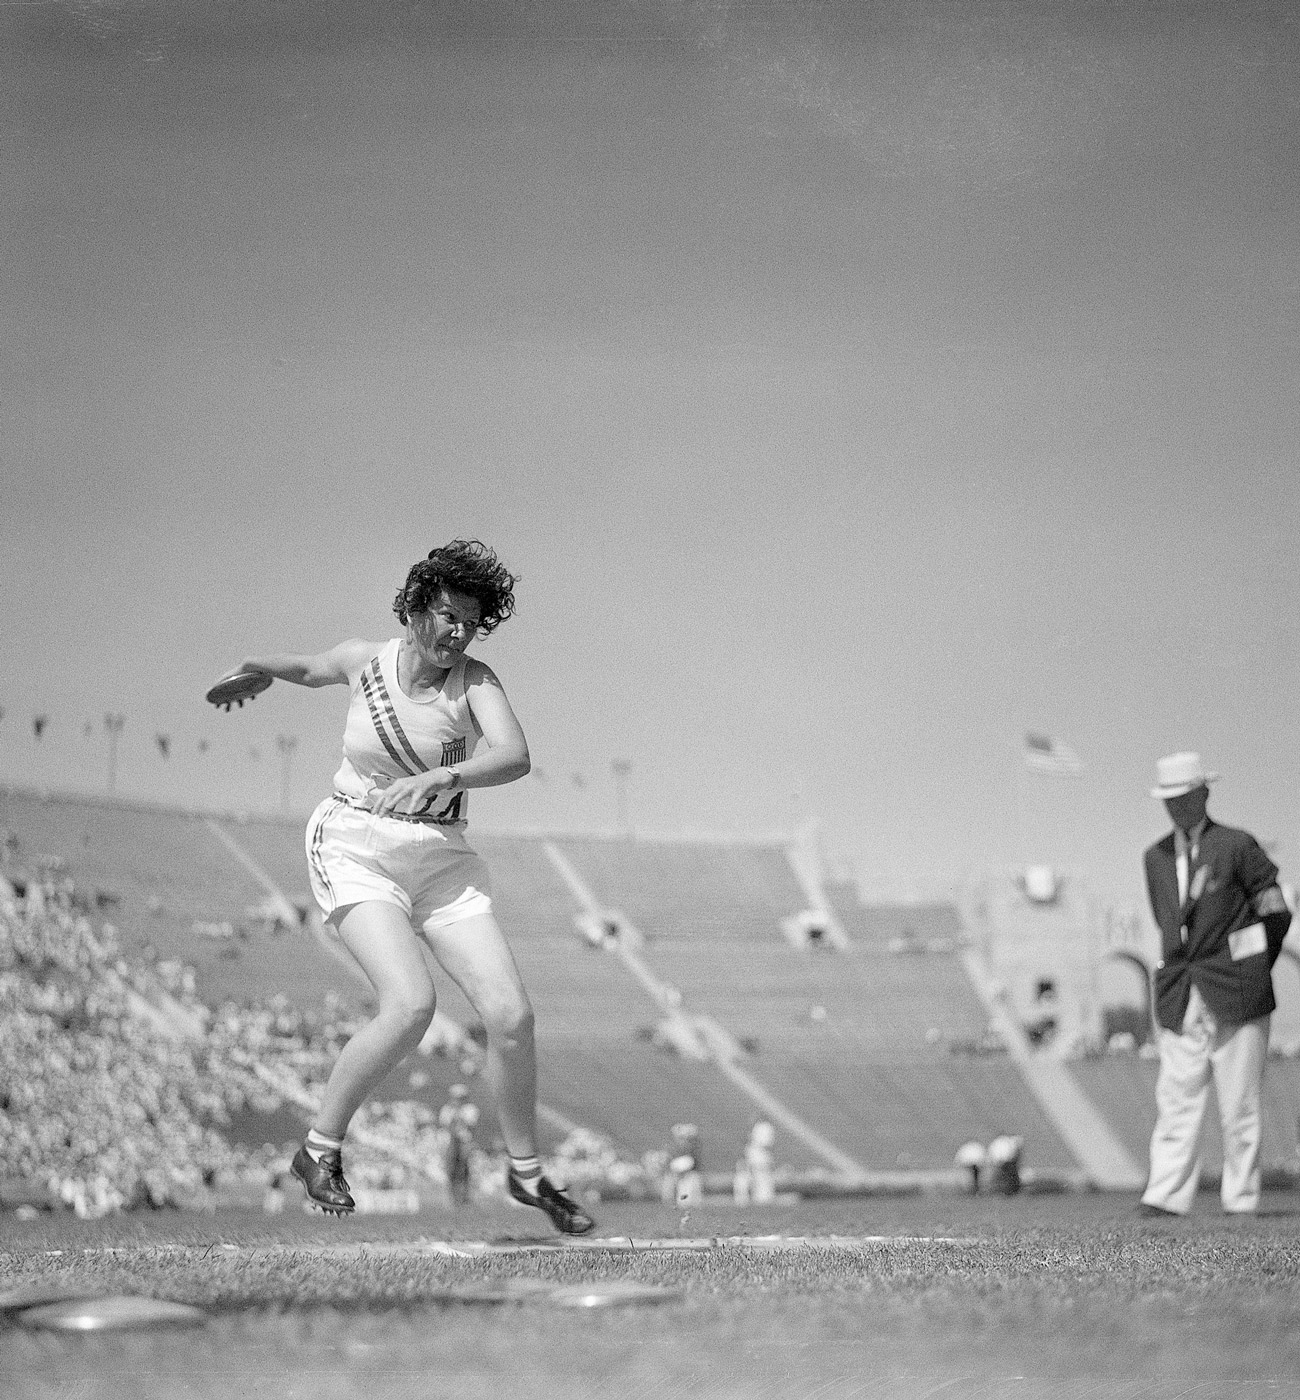 Margaret Jenkins, Track and Field, 1928, 1932 Olympics